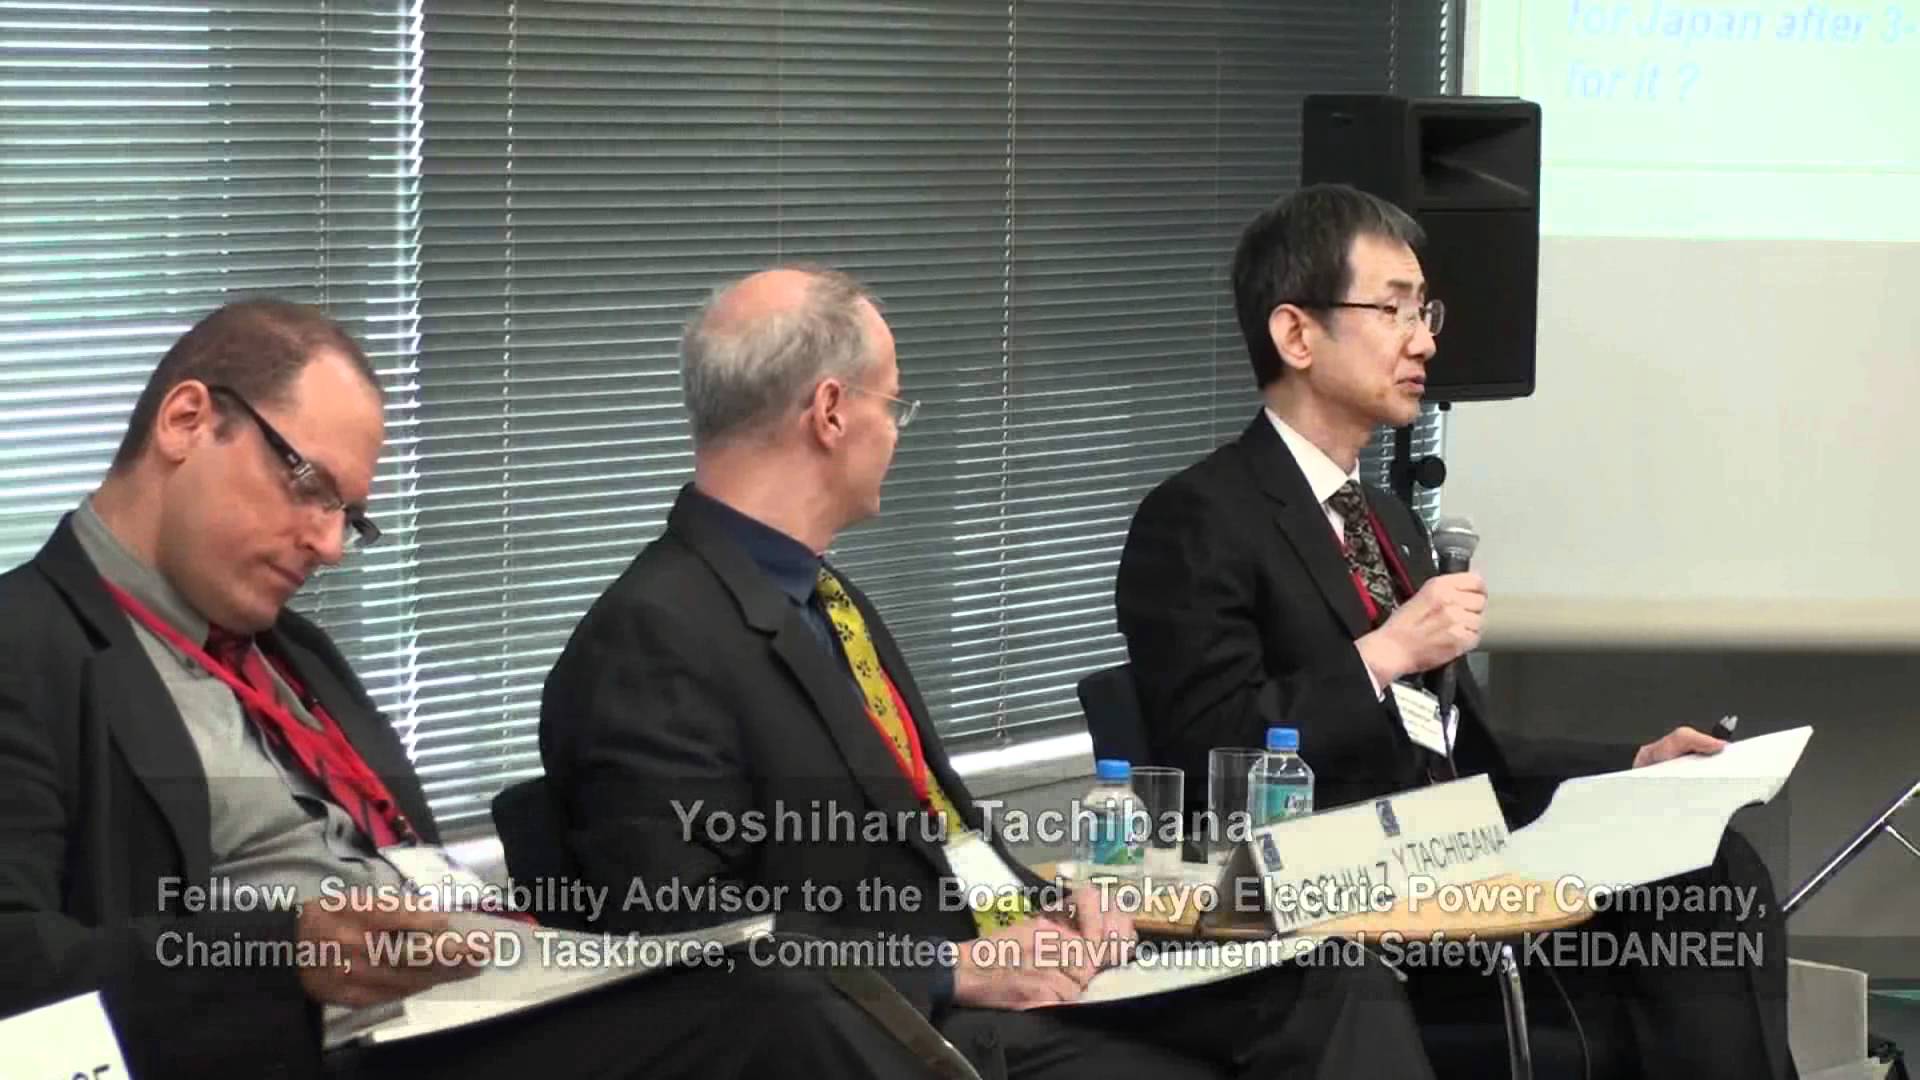 Part1 - Energy Policy and its Future (G1 Global Conference 2011)